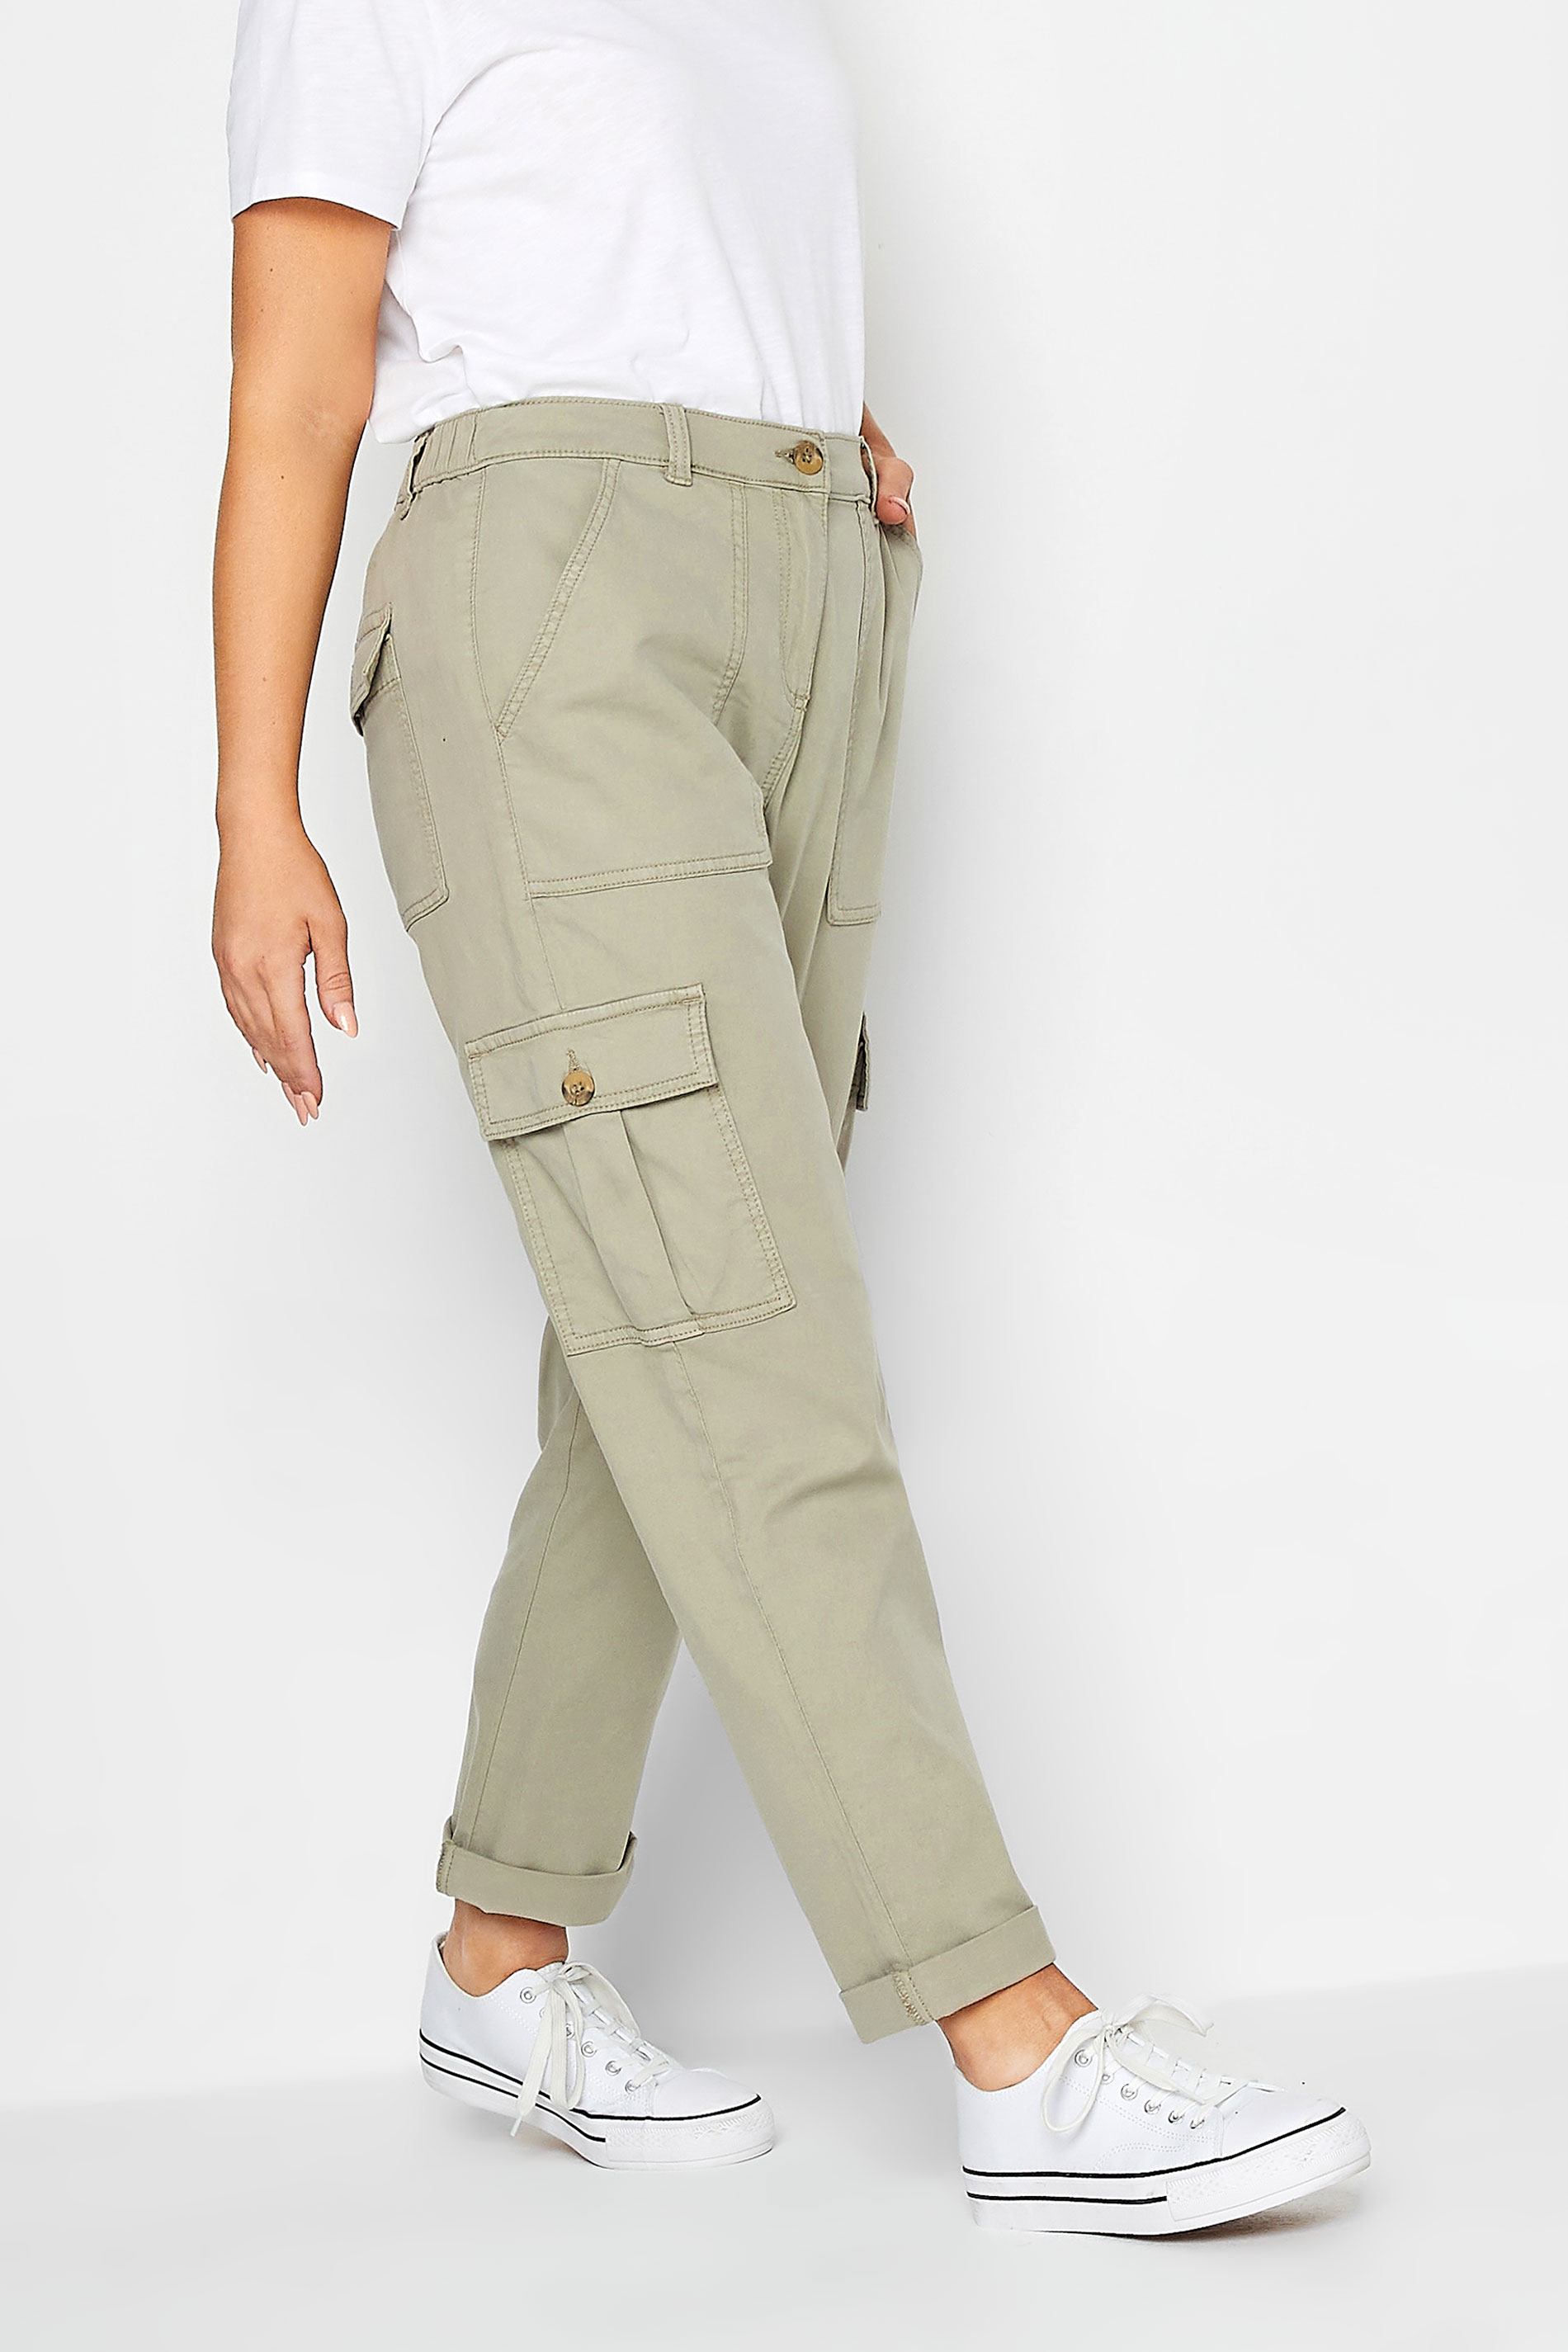 Womens Black Cargo Trousers  Police Supplies